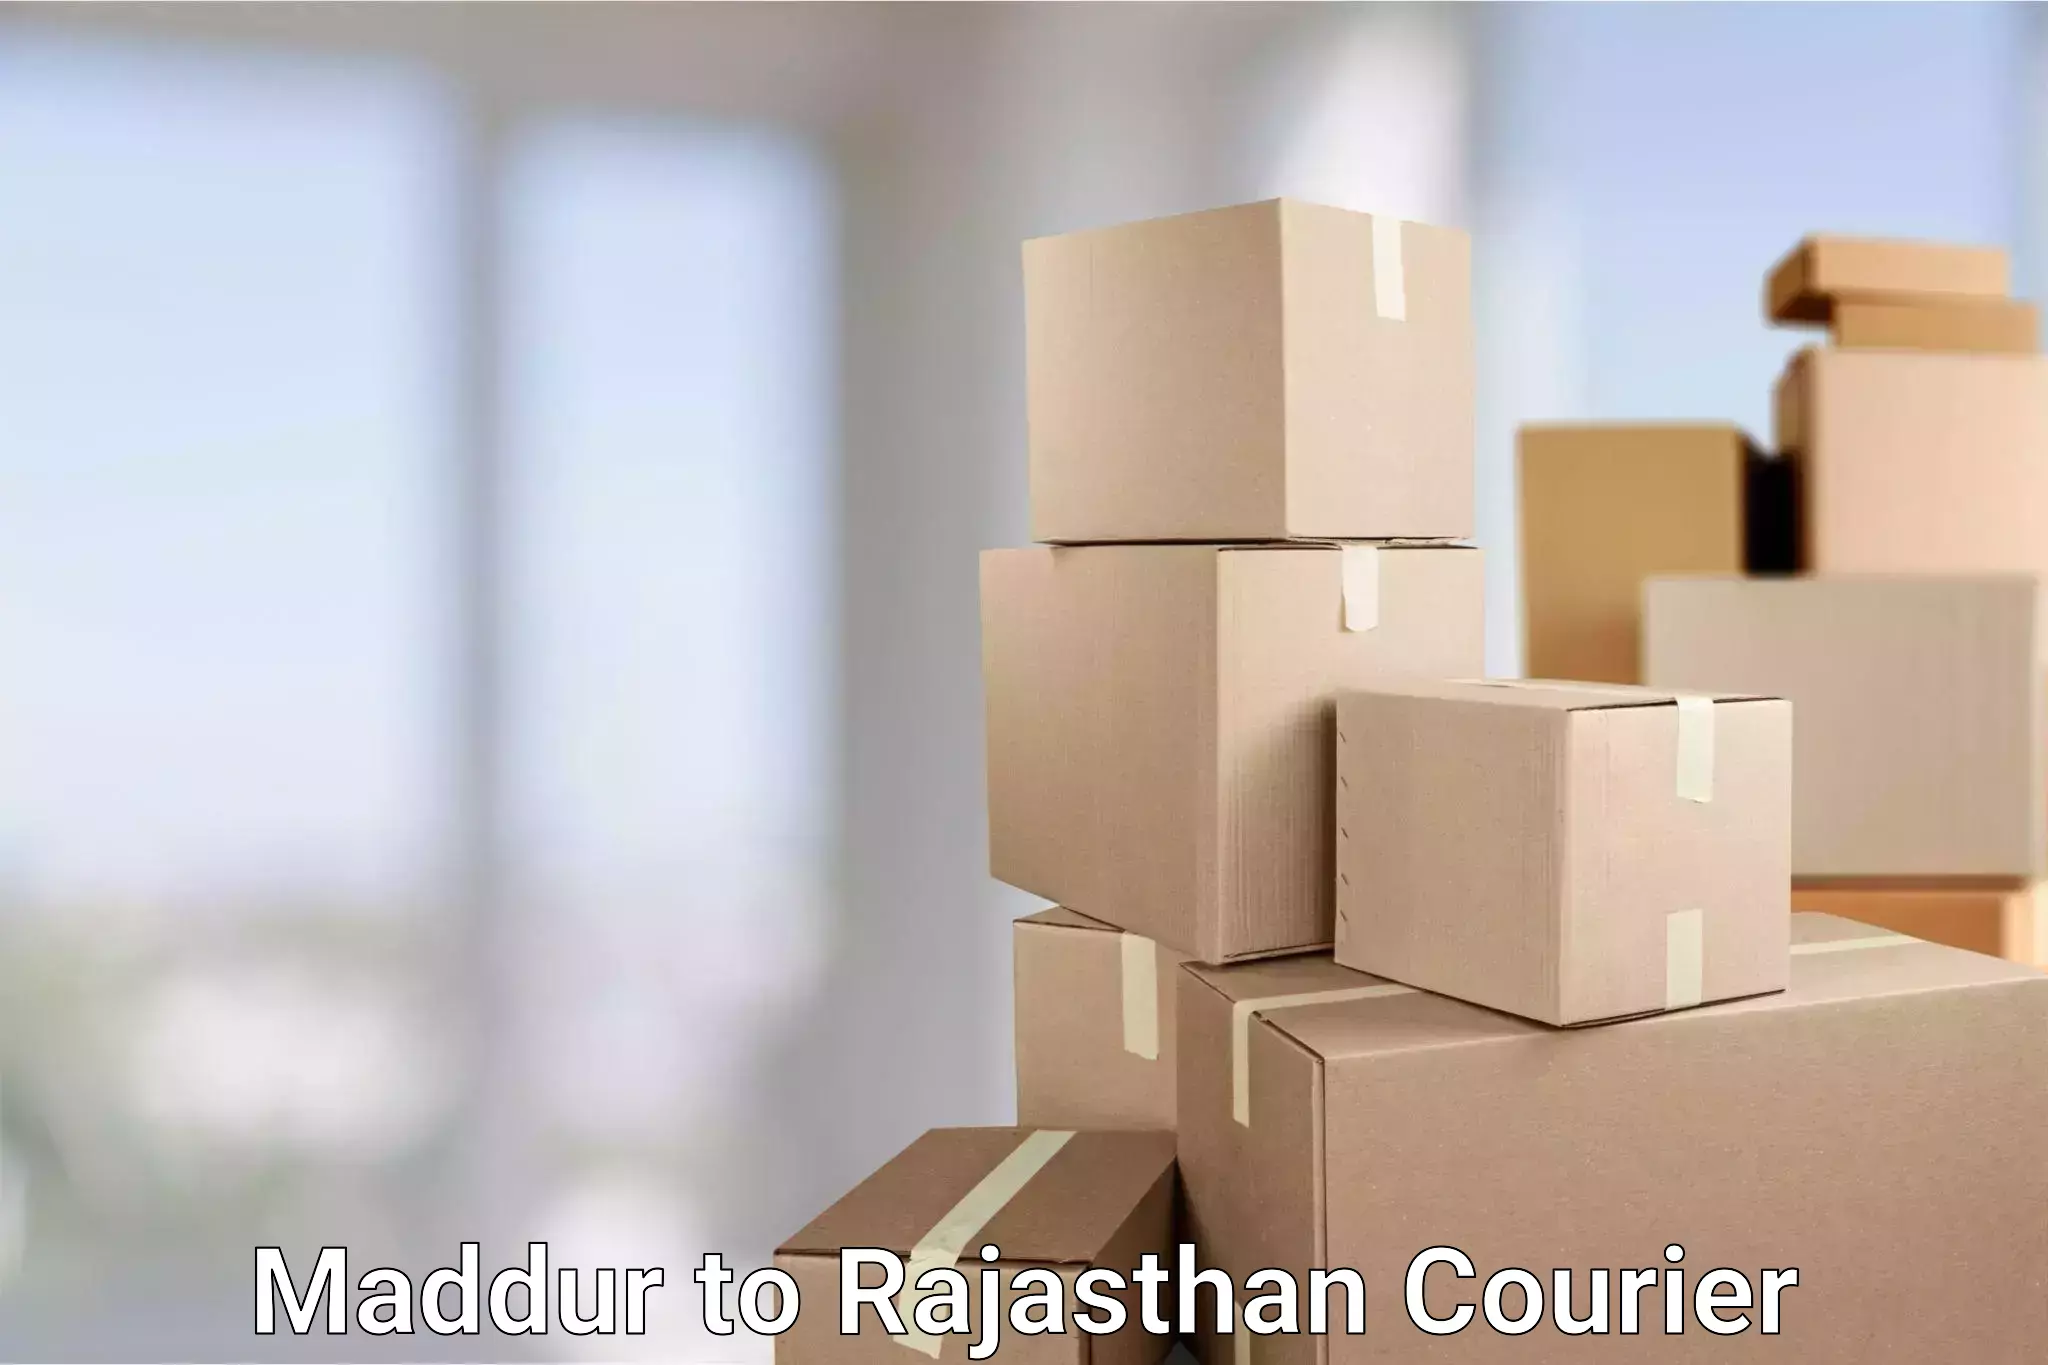 On-demand delivery Maddur to Rajasthan